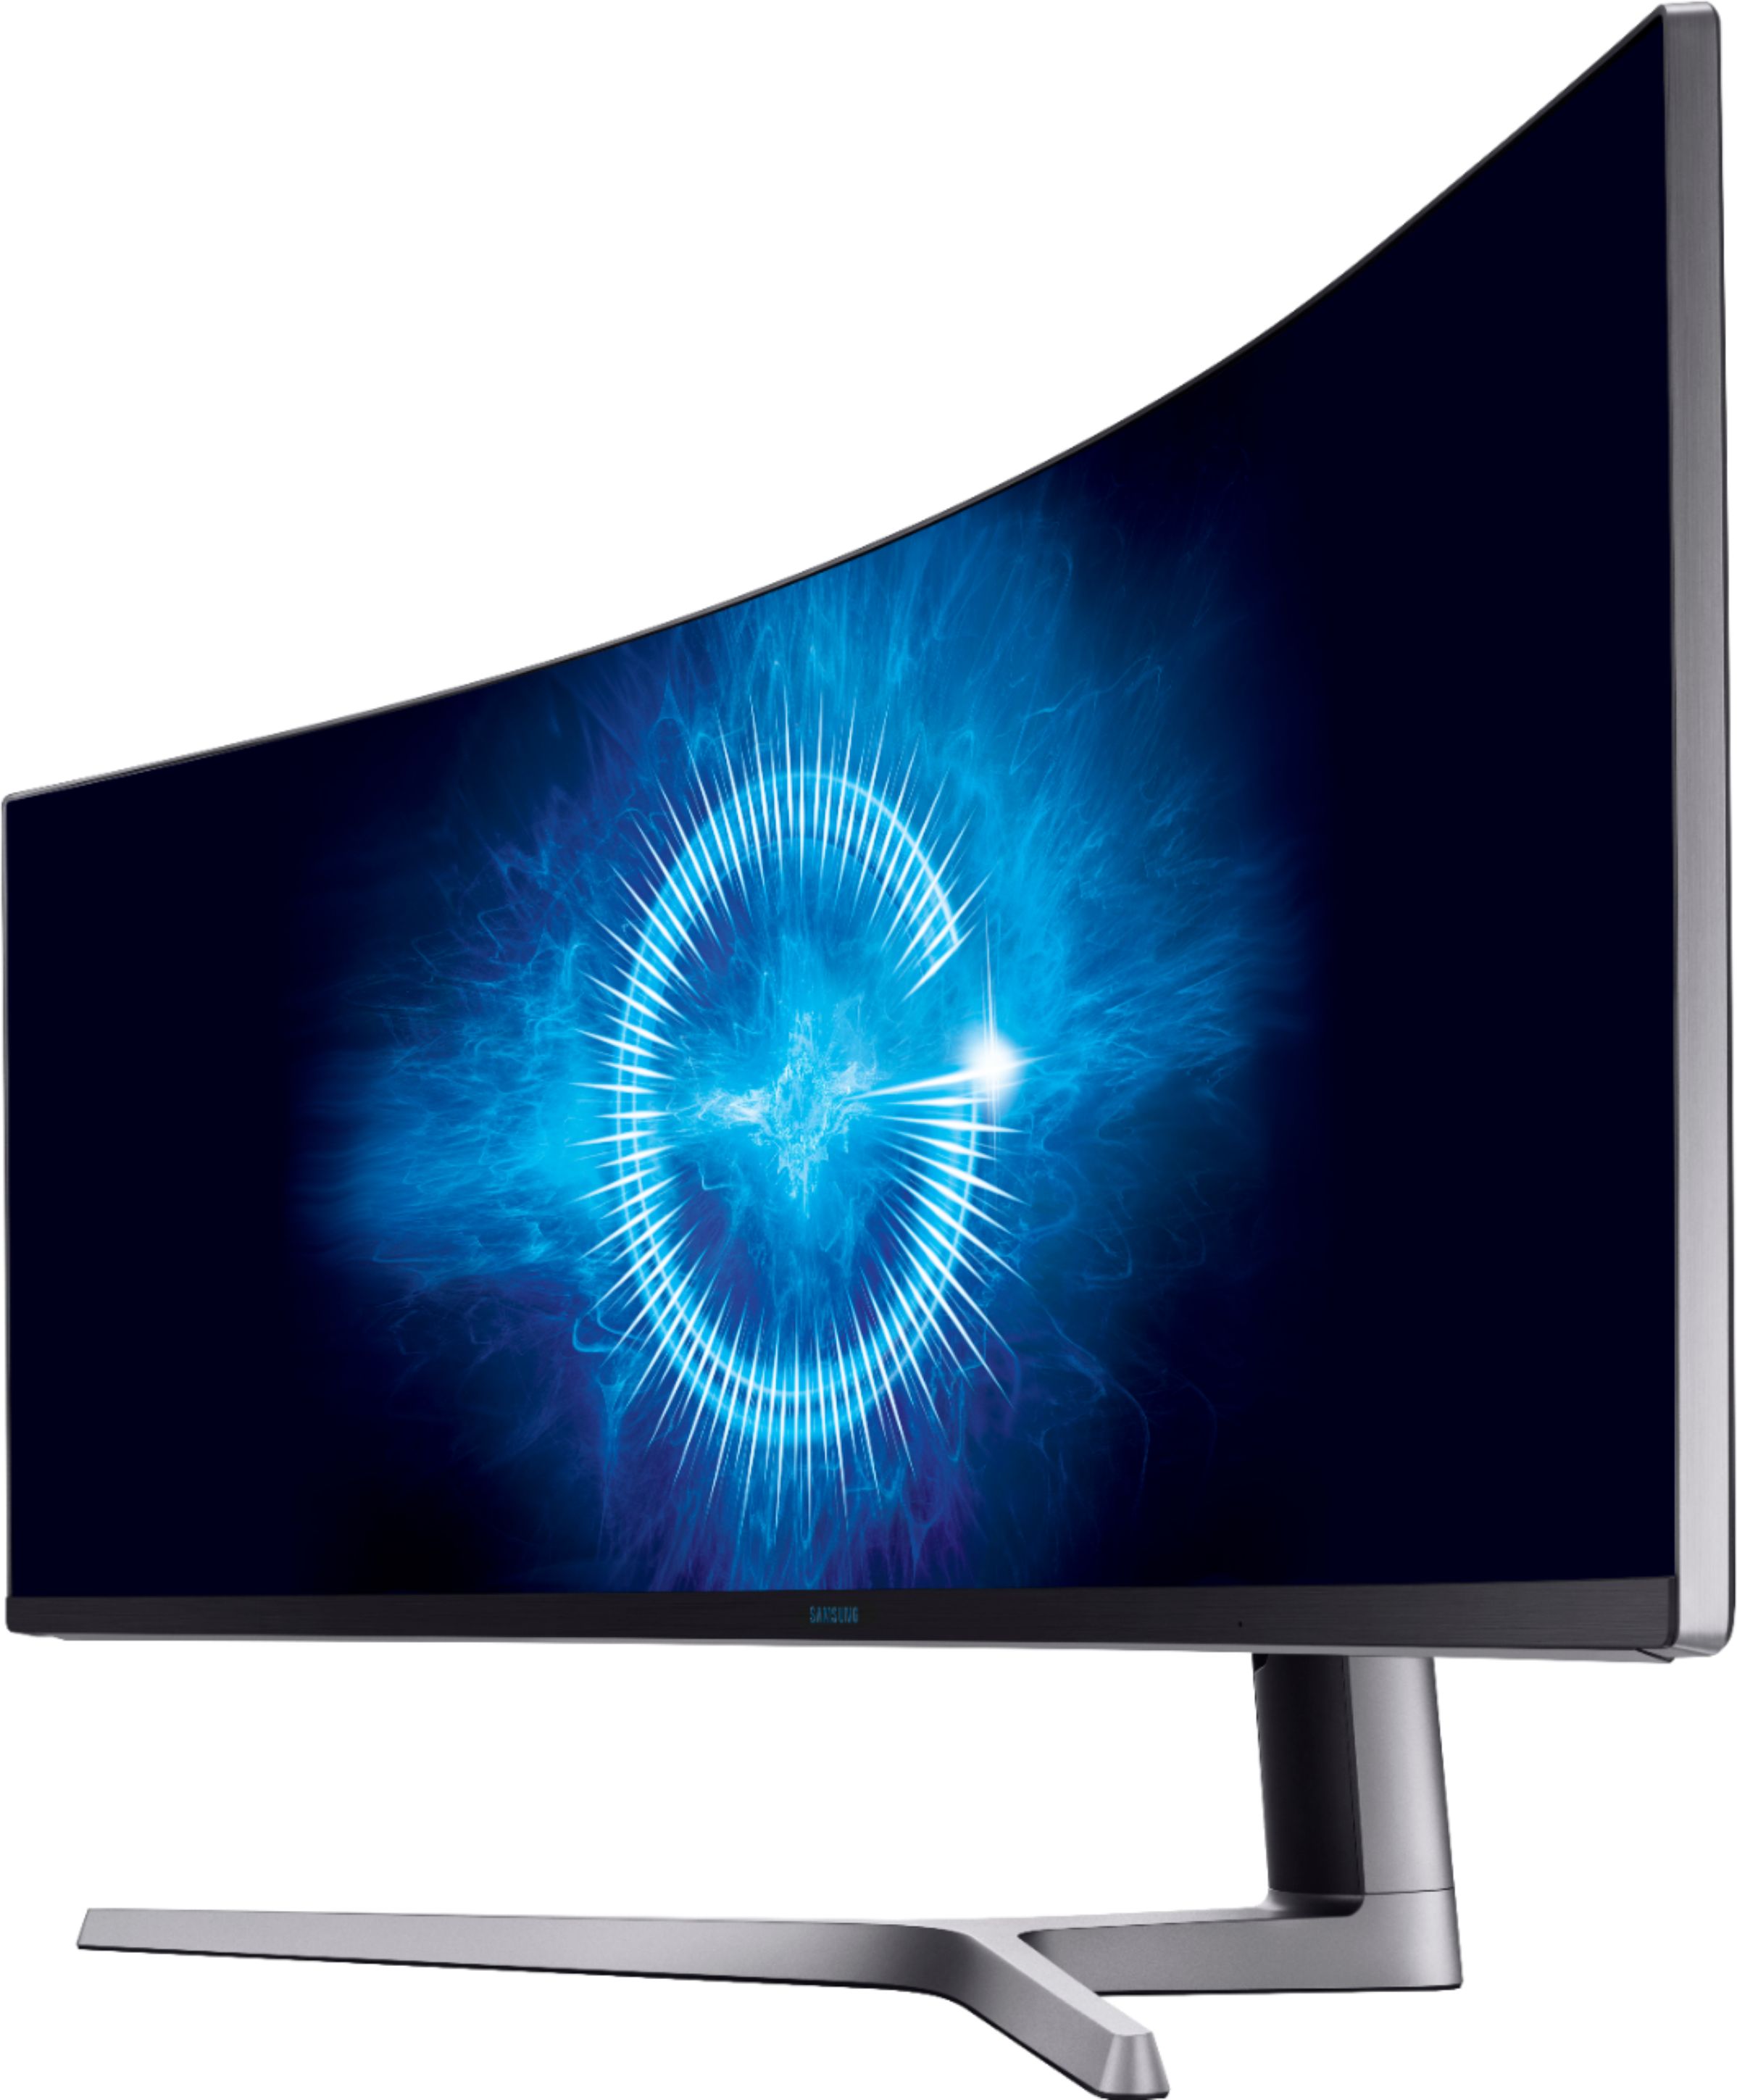 Left View: Samsung - Geek Squad Certified Refurbished 49" LED Curved FHD FreeSync Monitor with HDR - Matte Dark Blue/Black